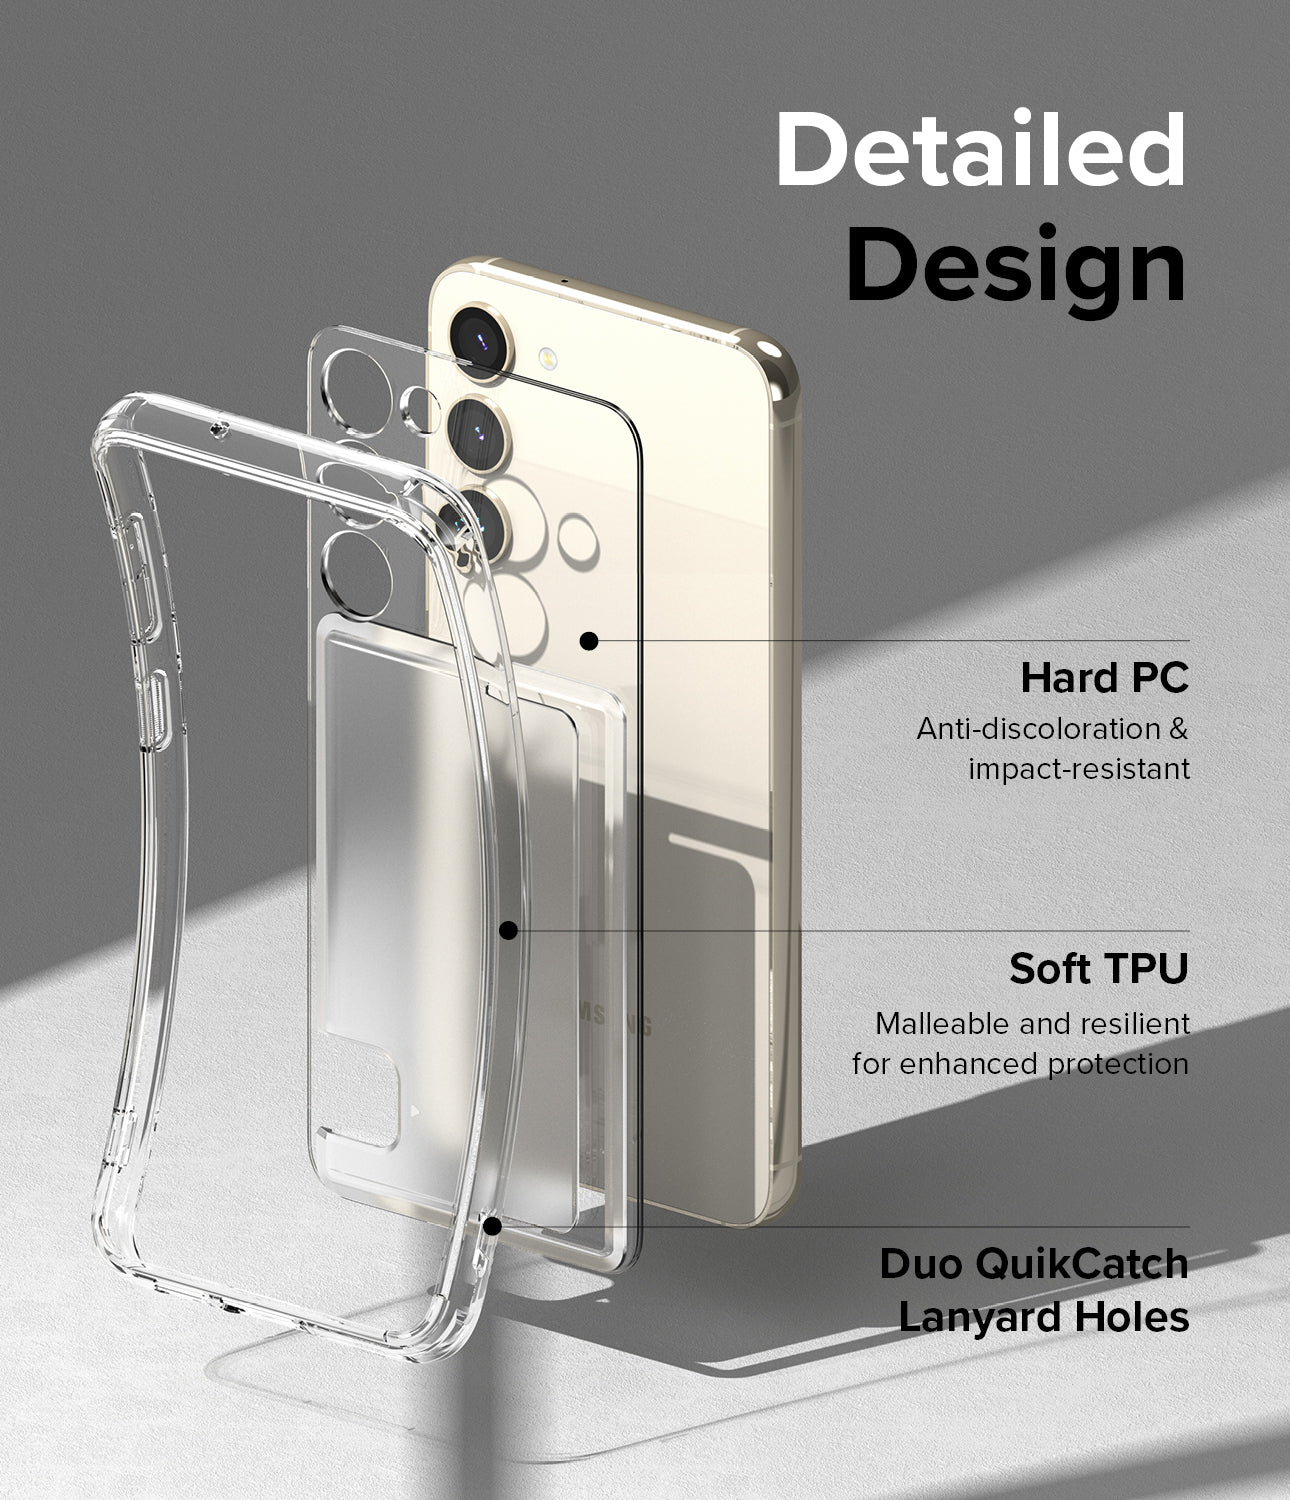 Detailed Design l Hard PC - Anti-discoloration & impact-resistant. Soft TPU - Malleable and resilient for enhanced protection. Duo QuikCatch Lanyard Holes.